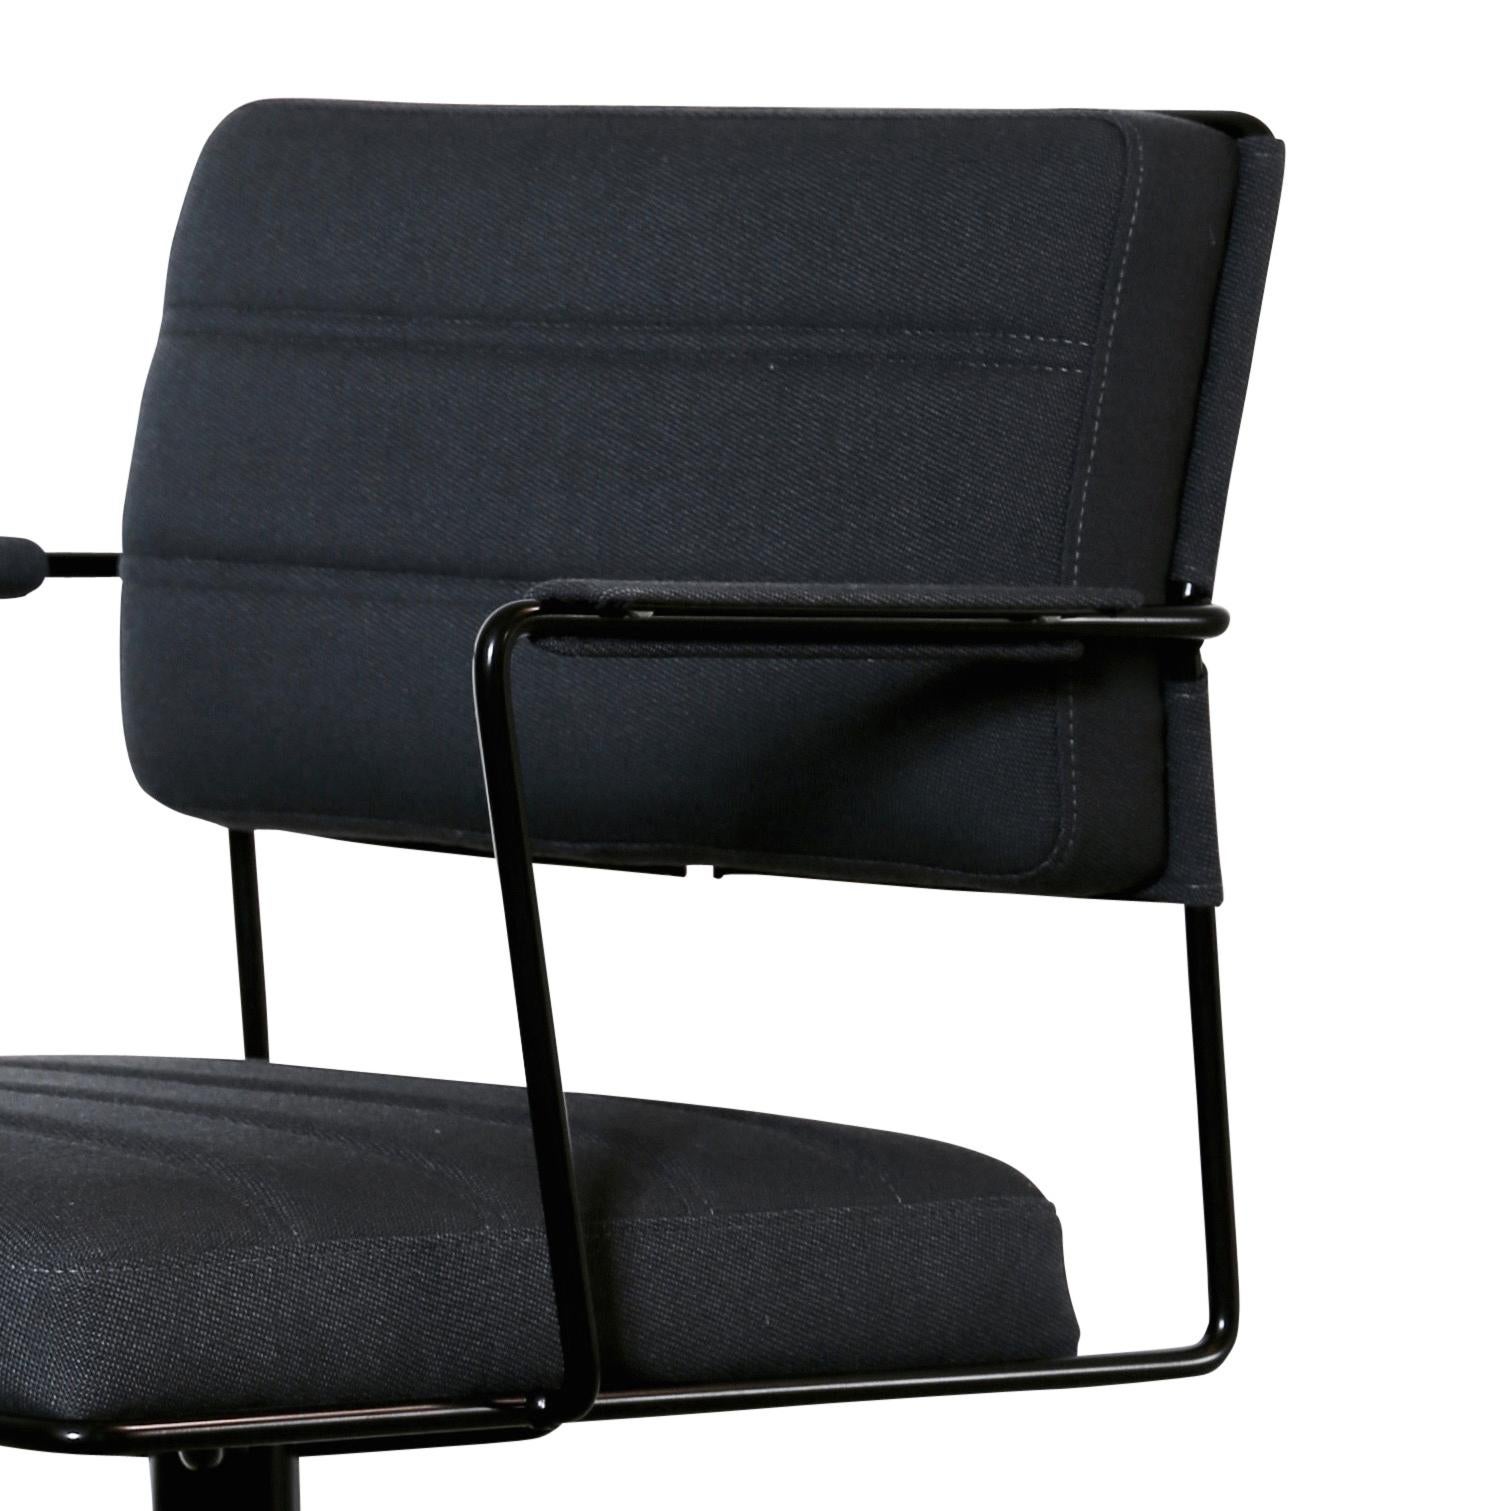 Danish Henrik Tengler, HT 2012 Black Upholstery Time Chair by One Collection For Sale